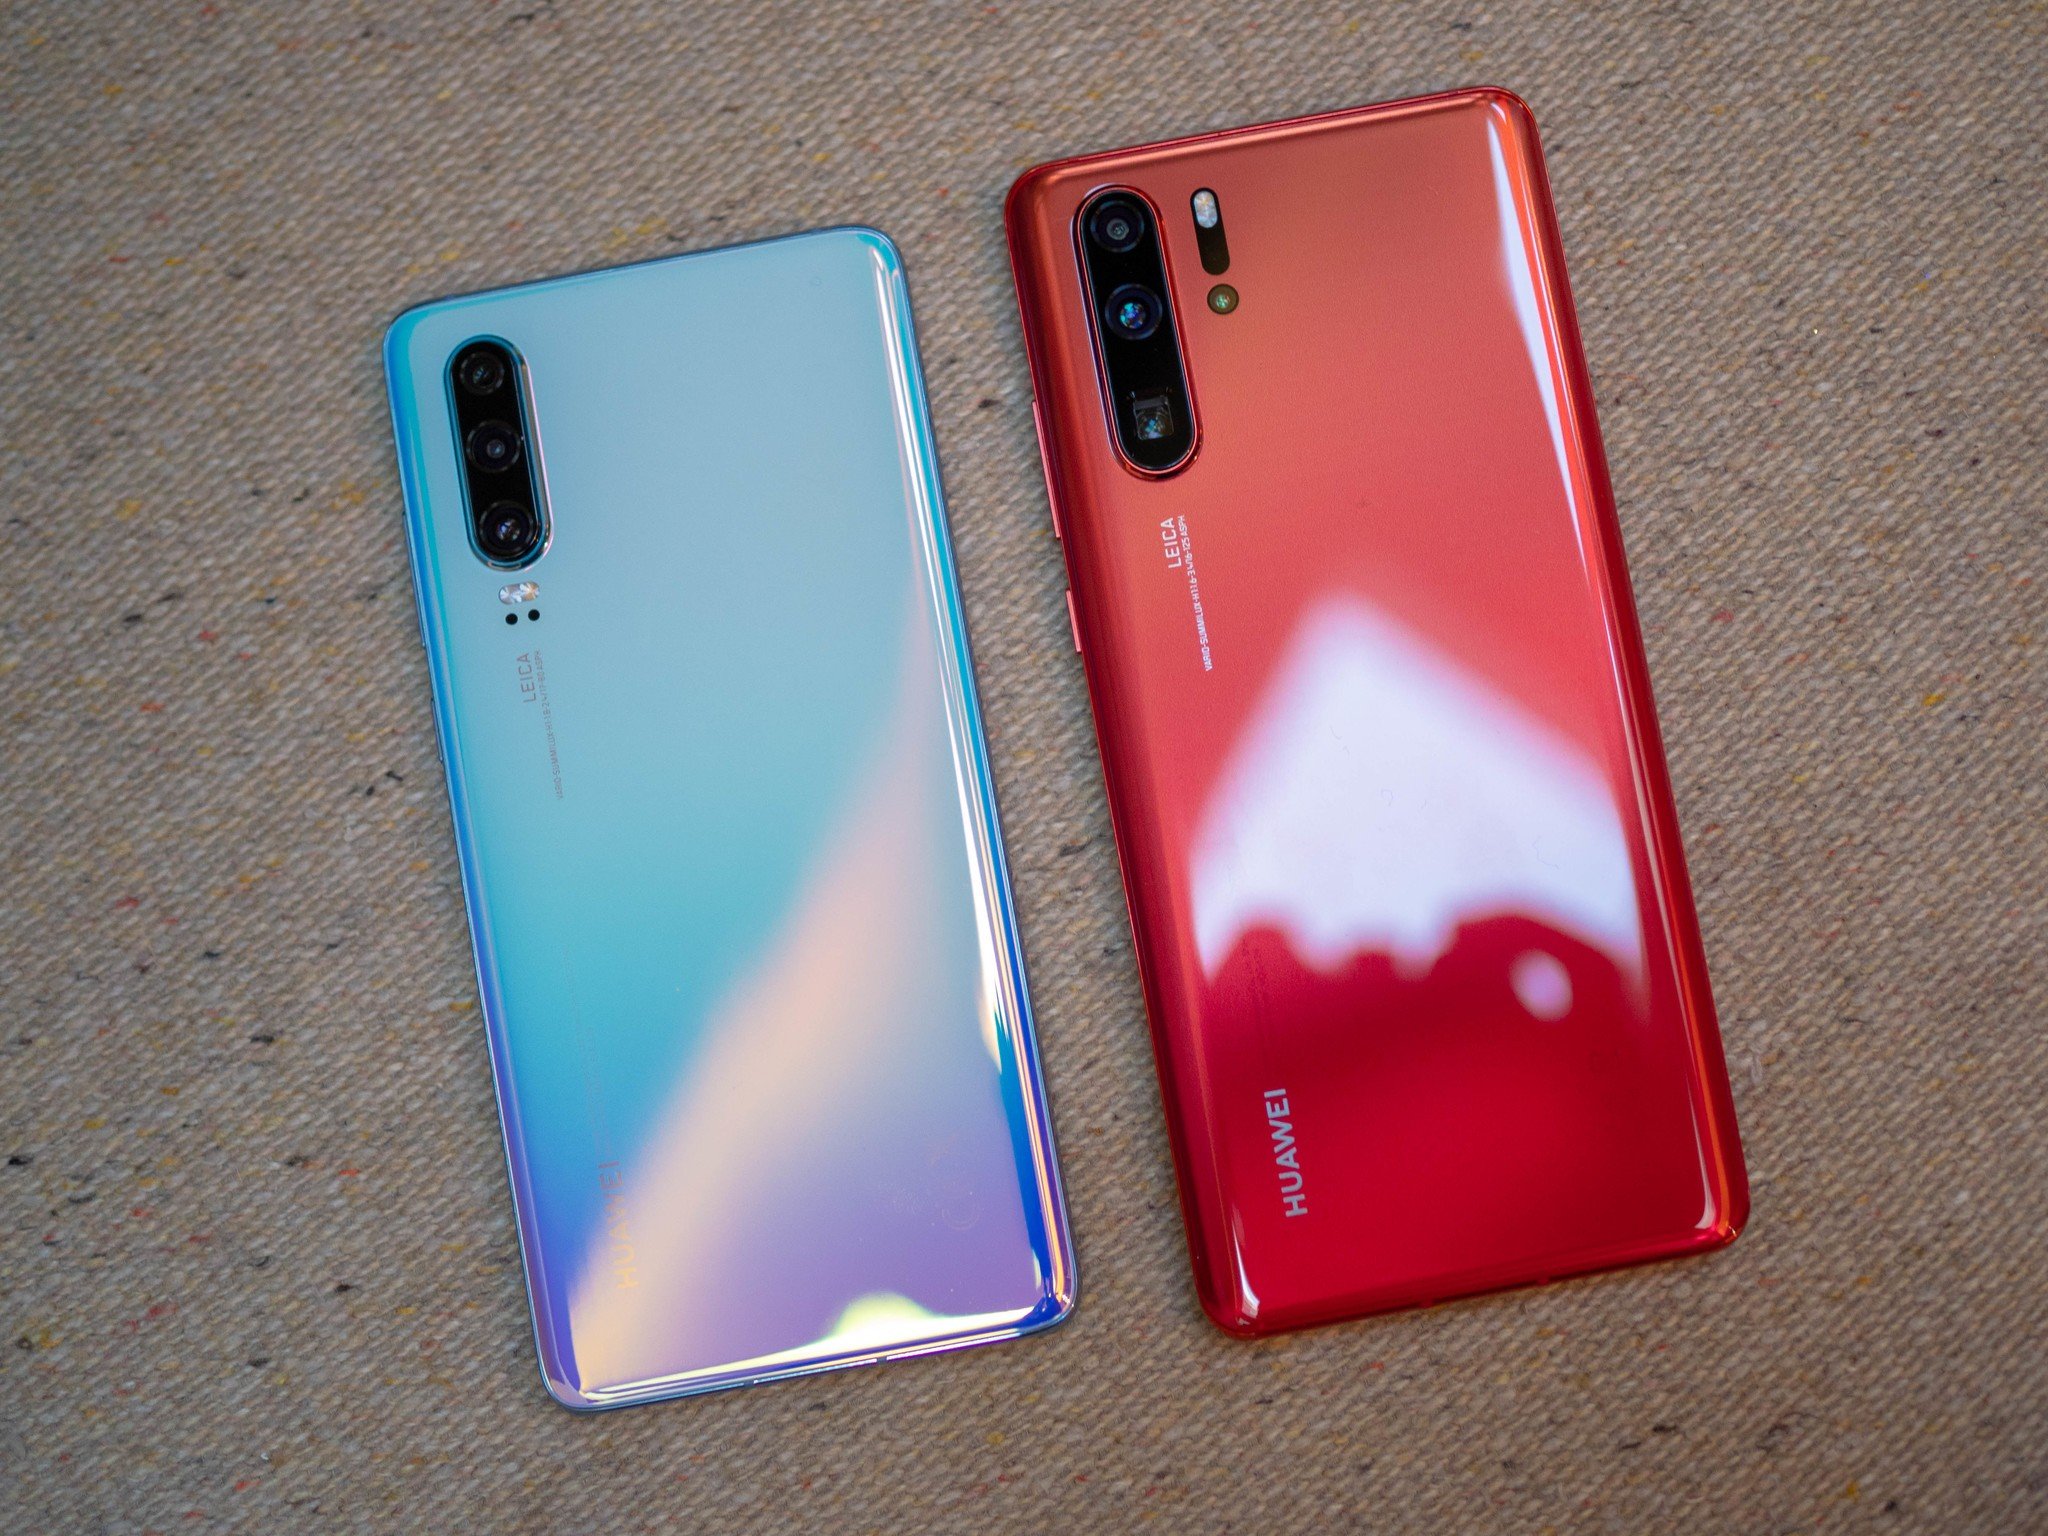 Zachte voeten Agnes Gray Rouwen Huawei P30, P30 Pro, and P30 Lite are now up for pre-order in Canada |  Android Central